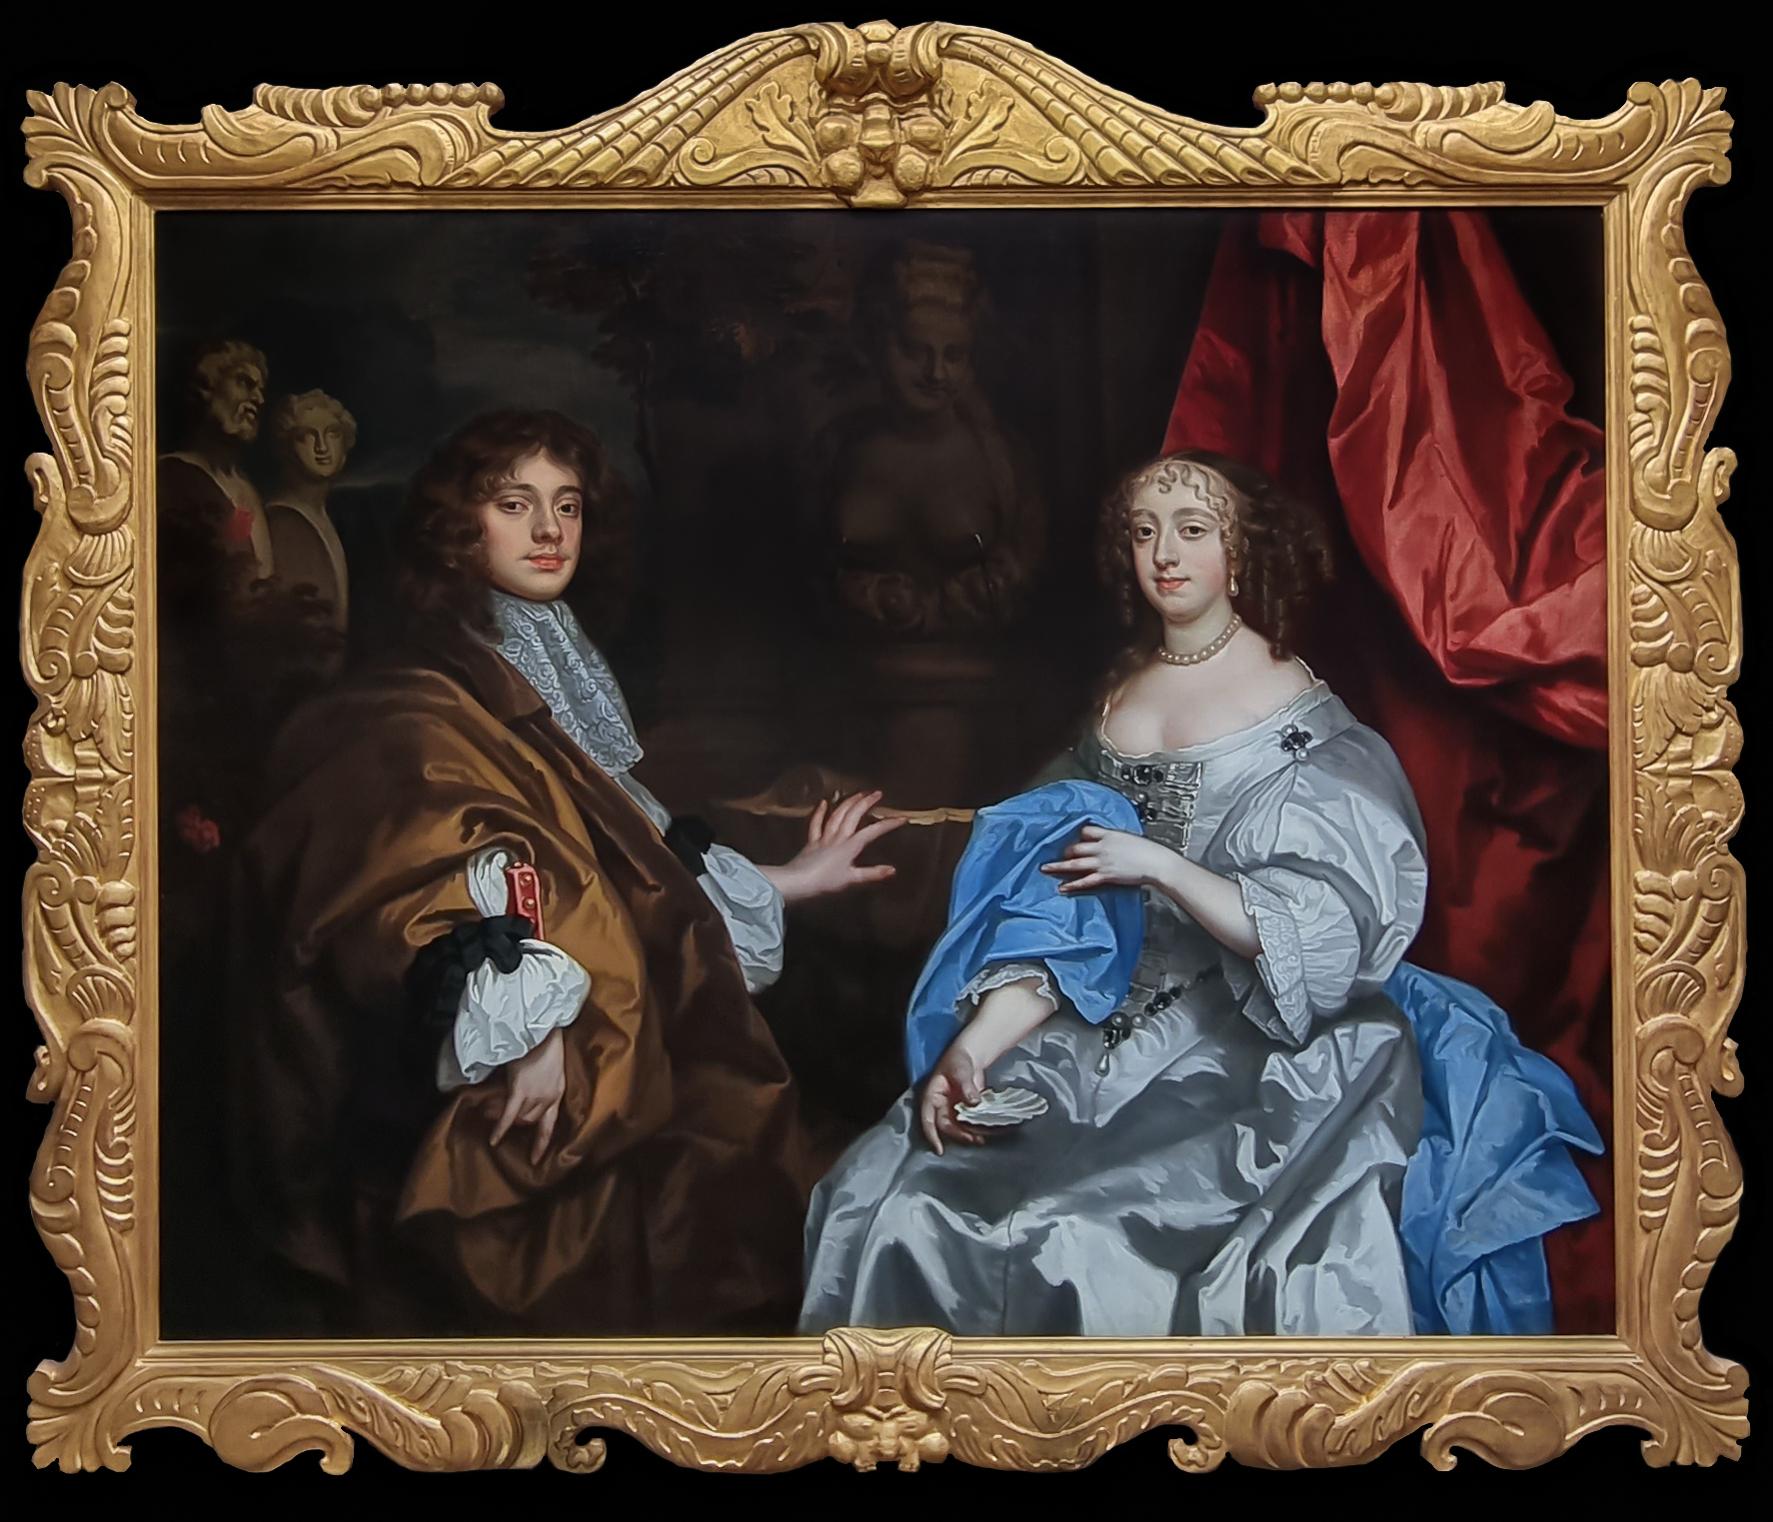 Sir Peter Lely and Studio Portrait Painting - Double Portrait of Sir John Rivers 3rd Baronet of Chafford, and Lady Anne Rivers